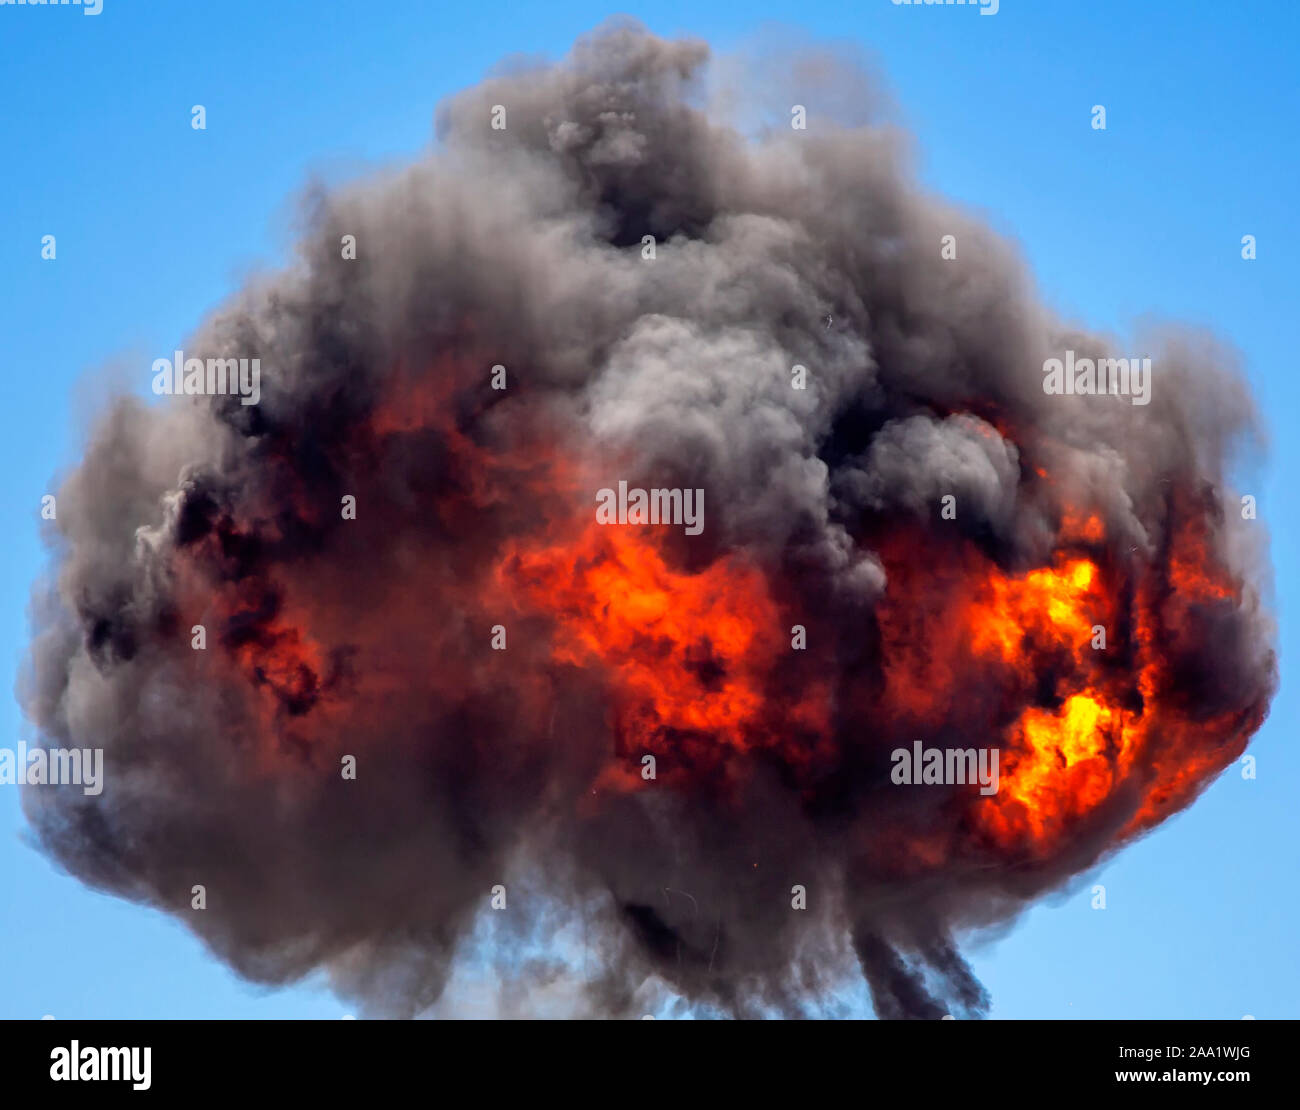 Ball of smoke and fire from mutions explosion against blue sky Stock Photo